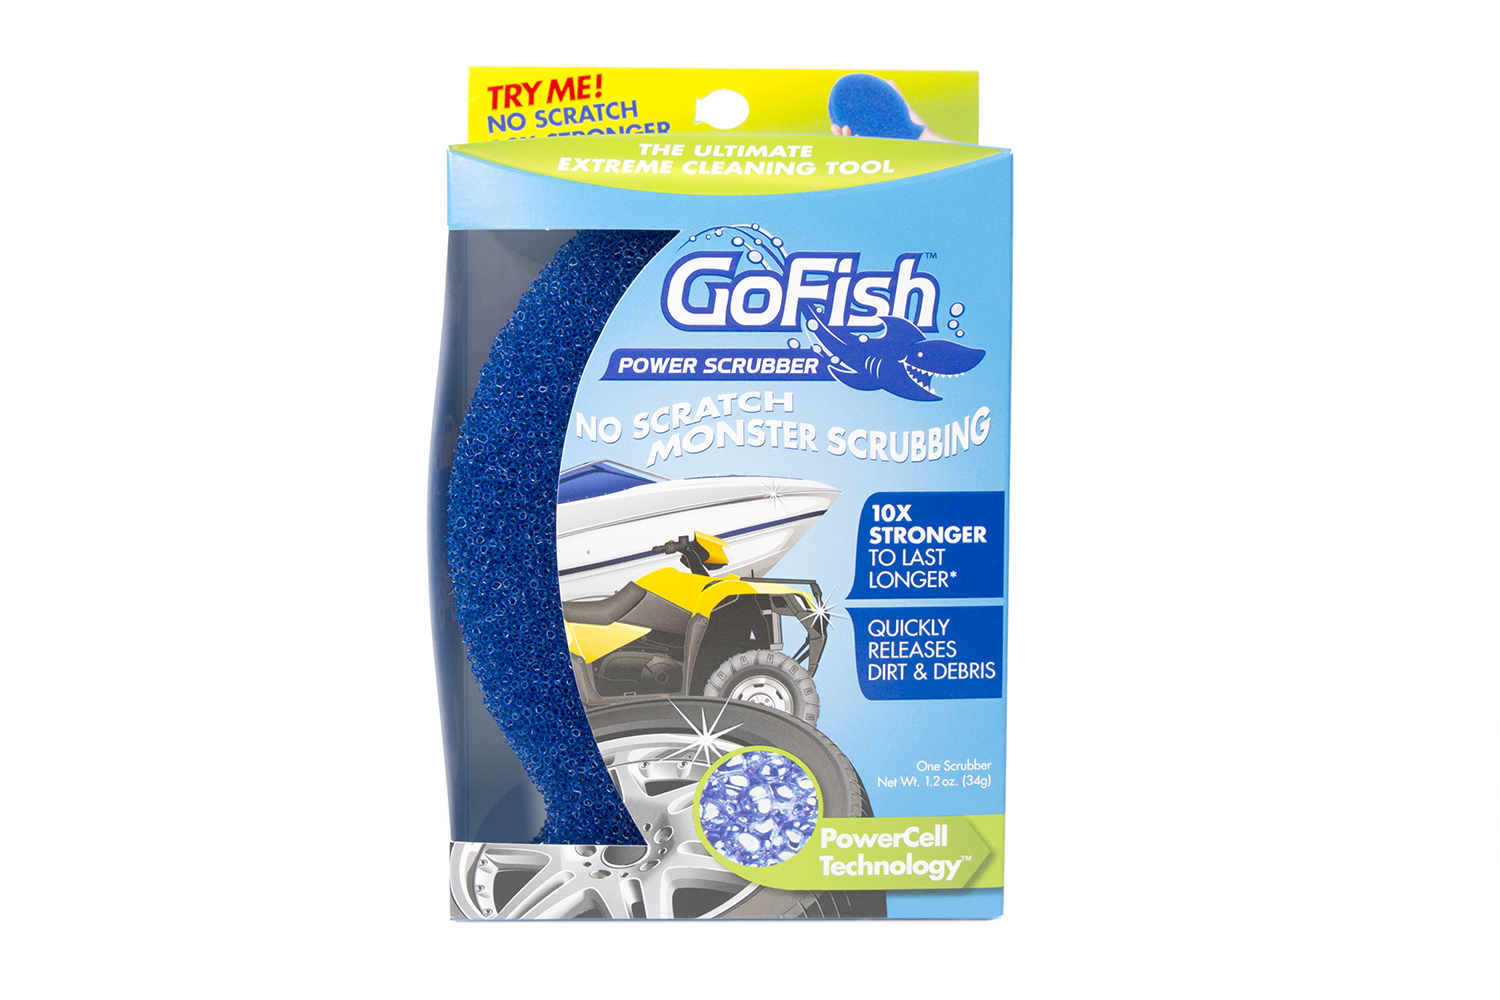 dishfish-gofish-power-scrubber-1pack-front.png